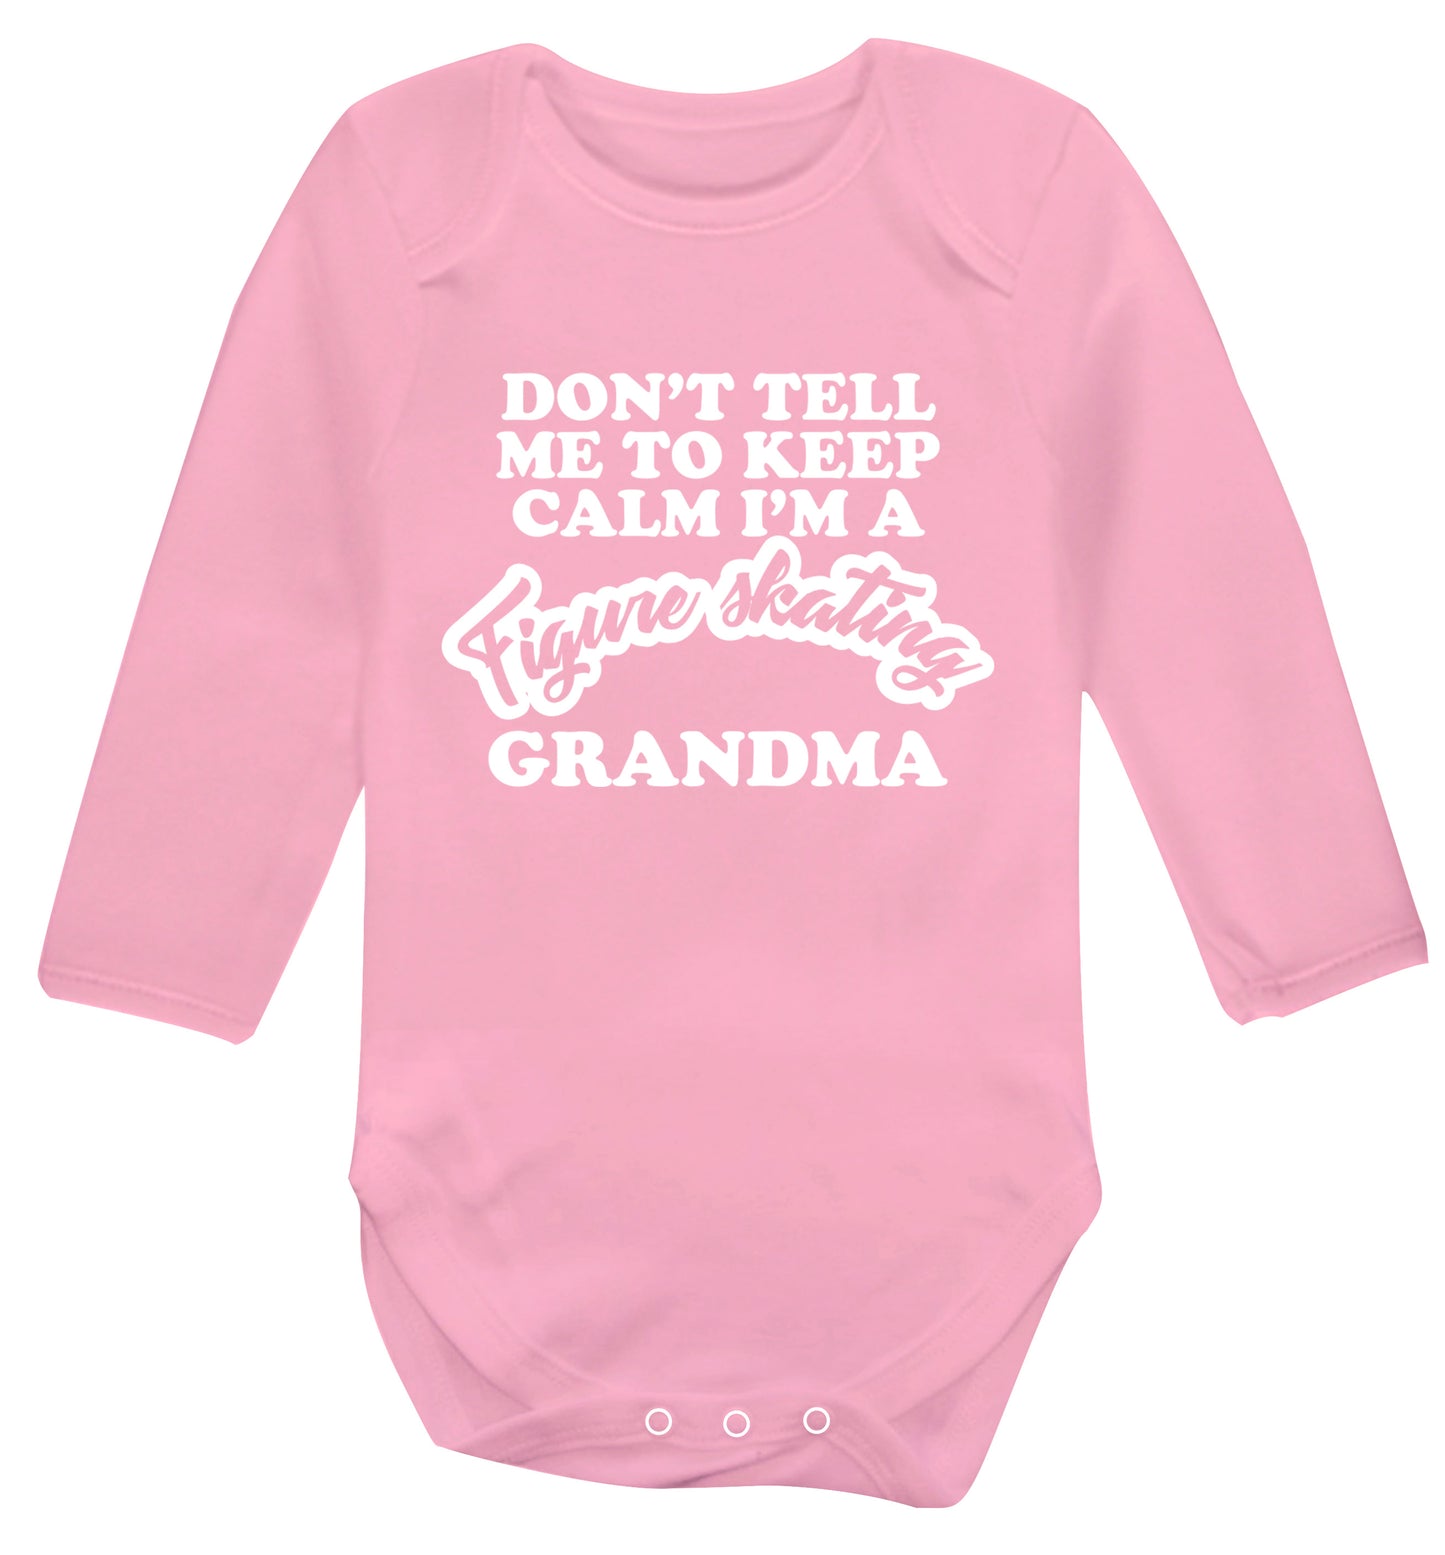 Don't tell me to keep calm I'm a figure skating grandma Baby Vest long sleeved pale pink 6-12 months